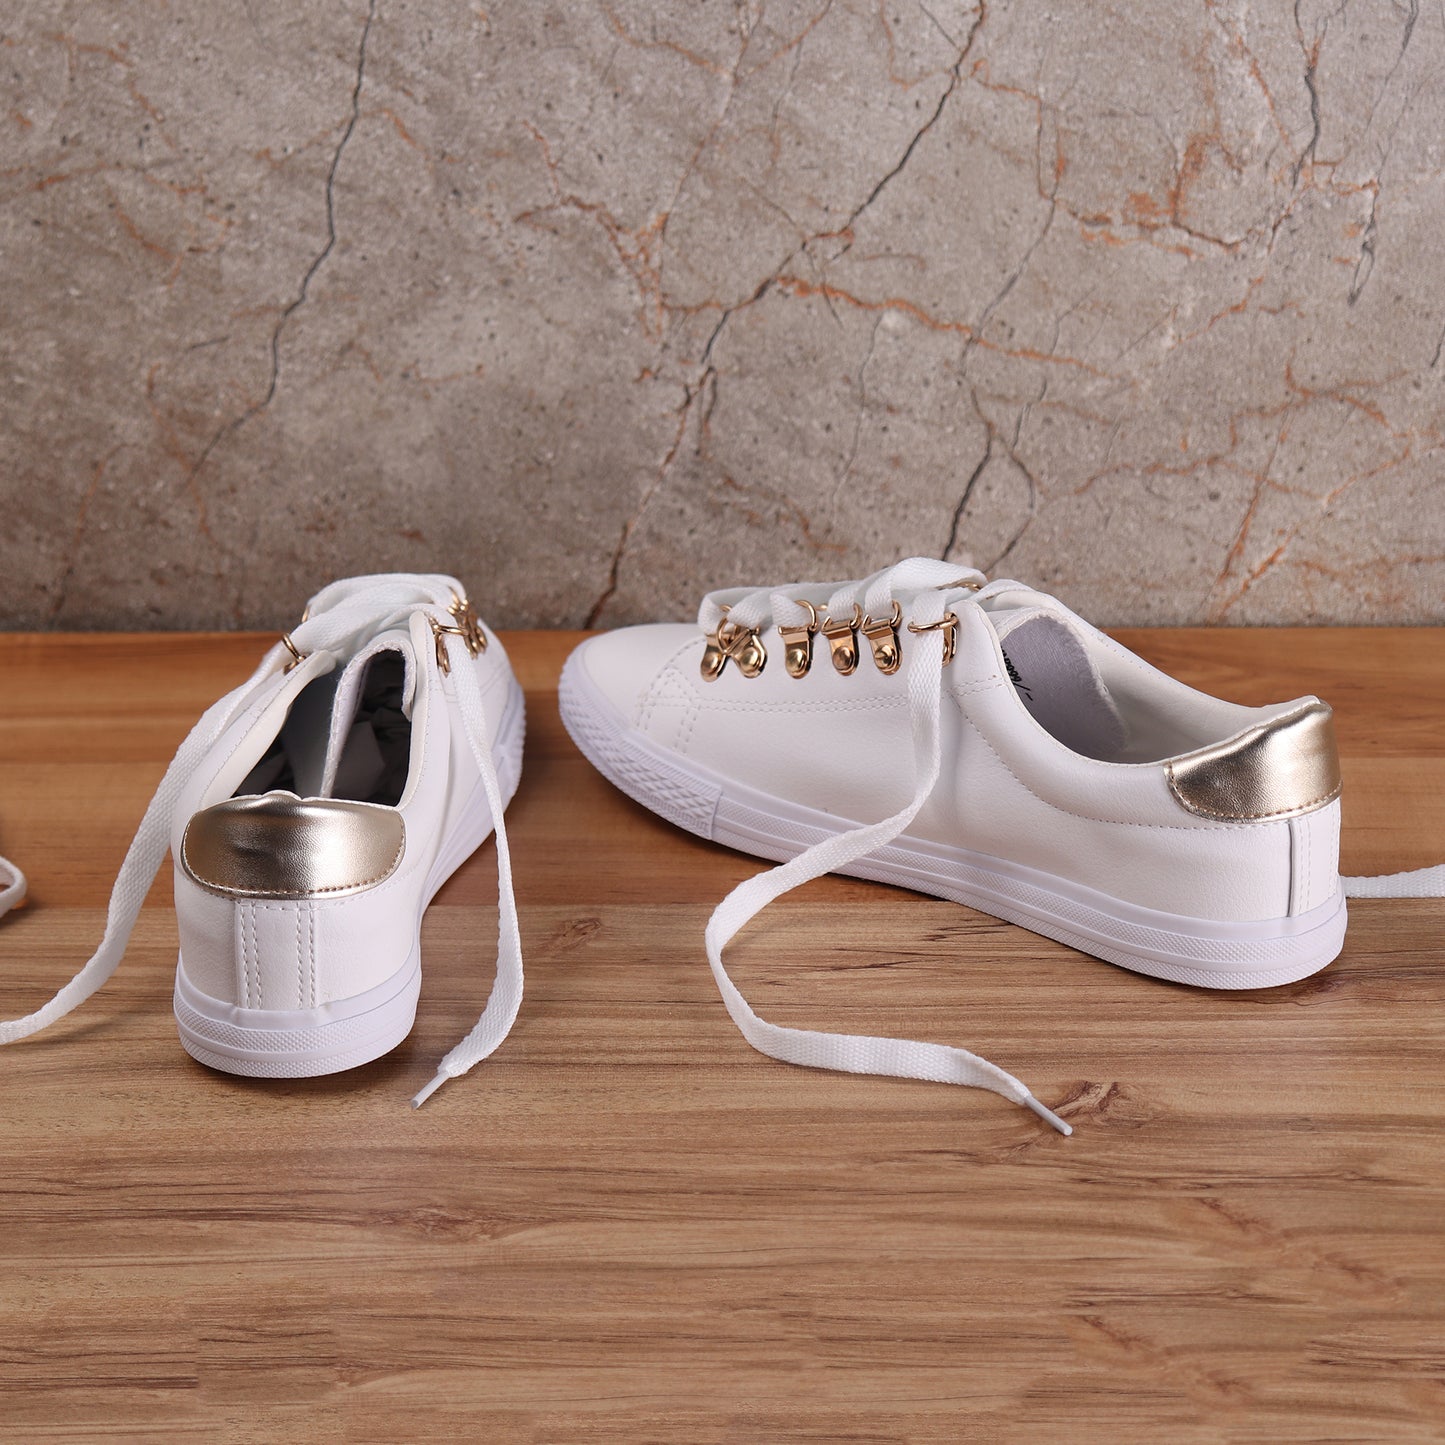 Foot Wear,White Sneaker with Golden Accents - Cippele Multi Store